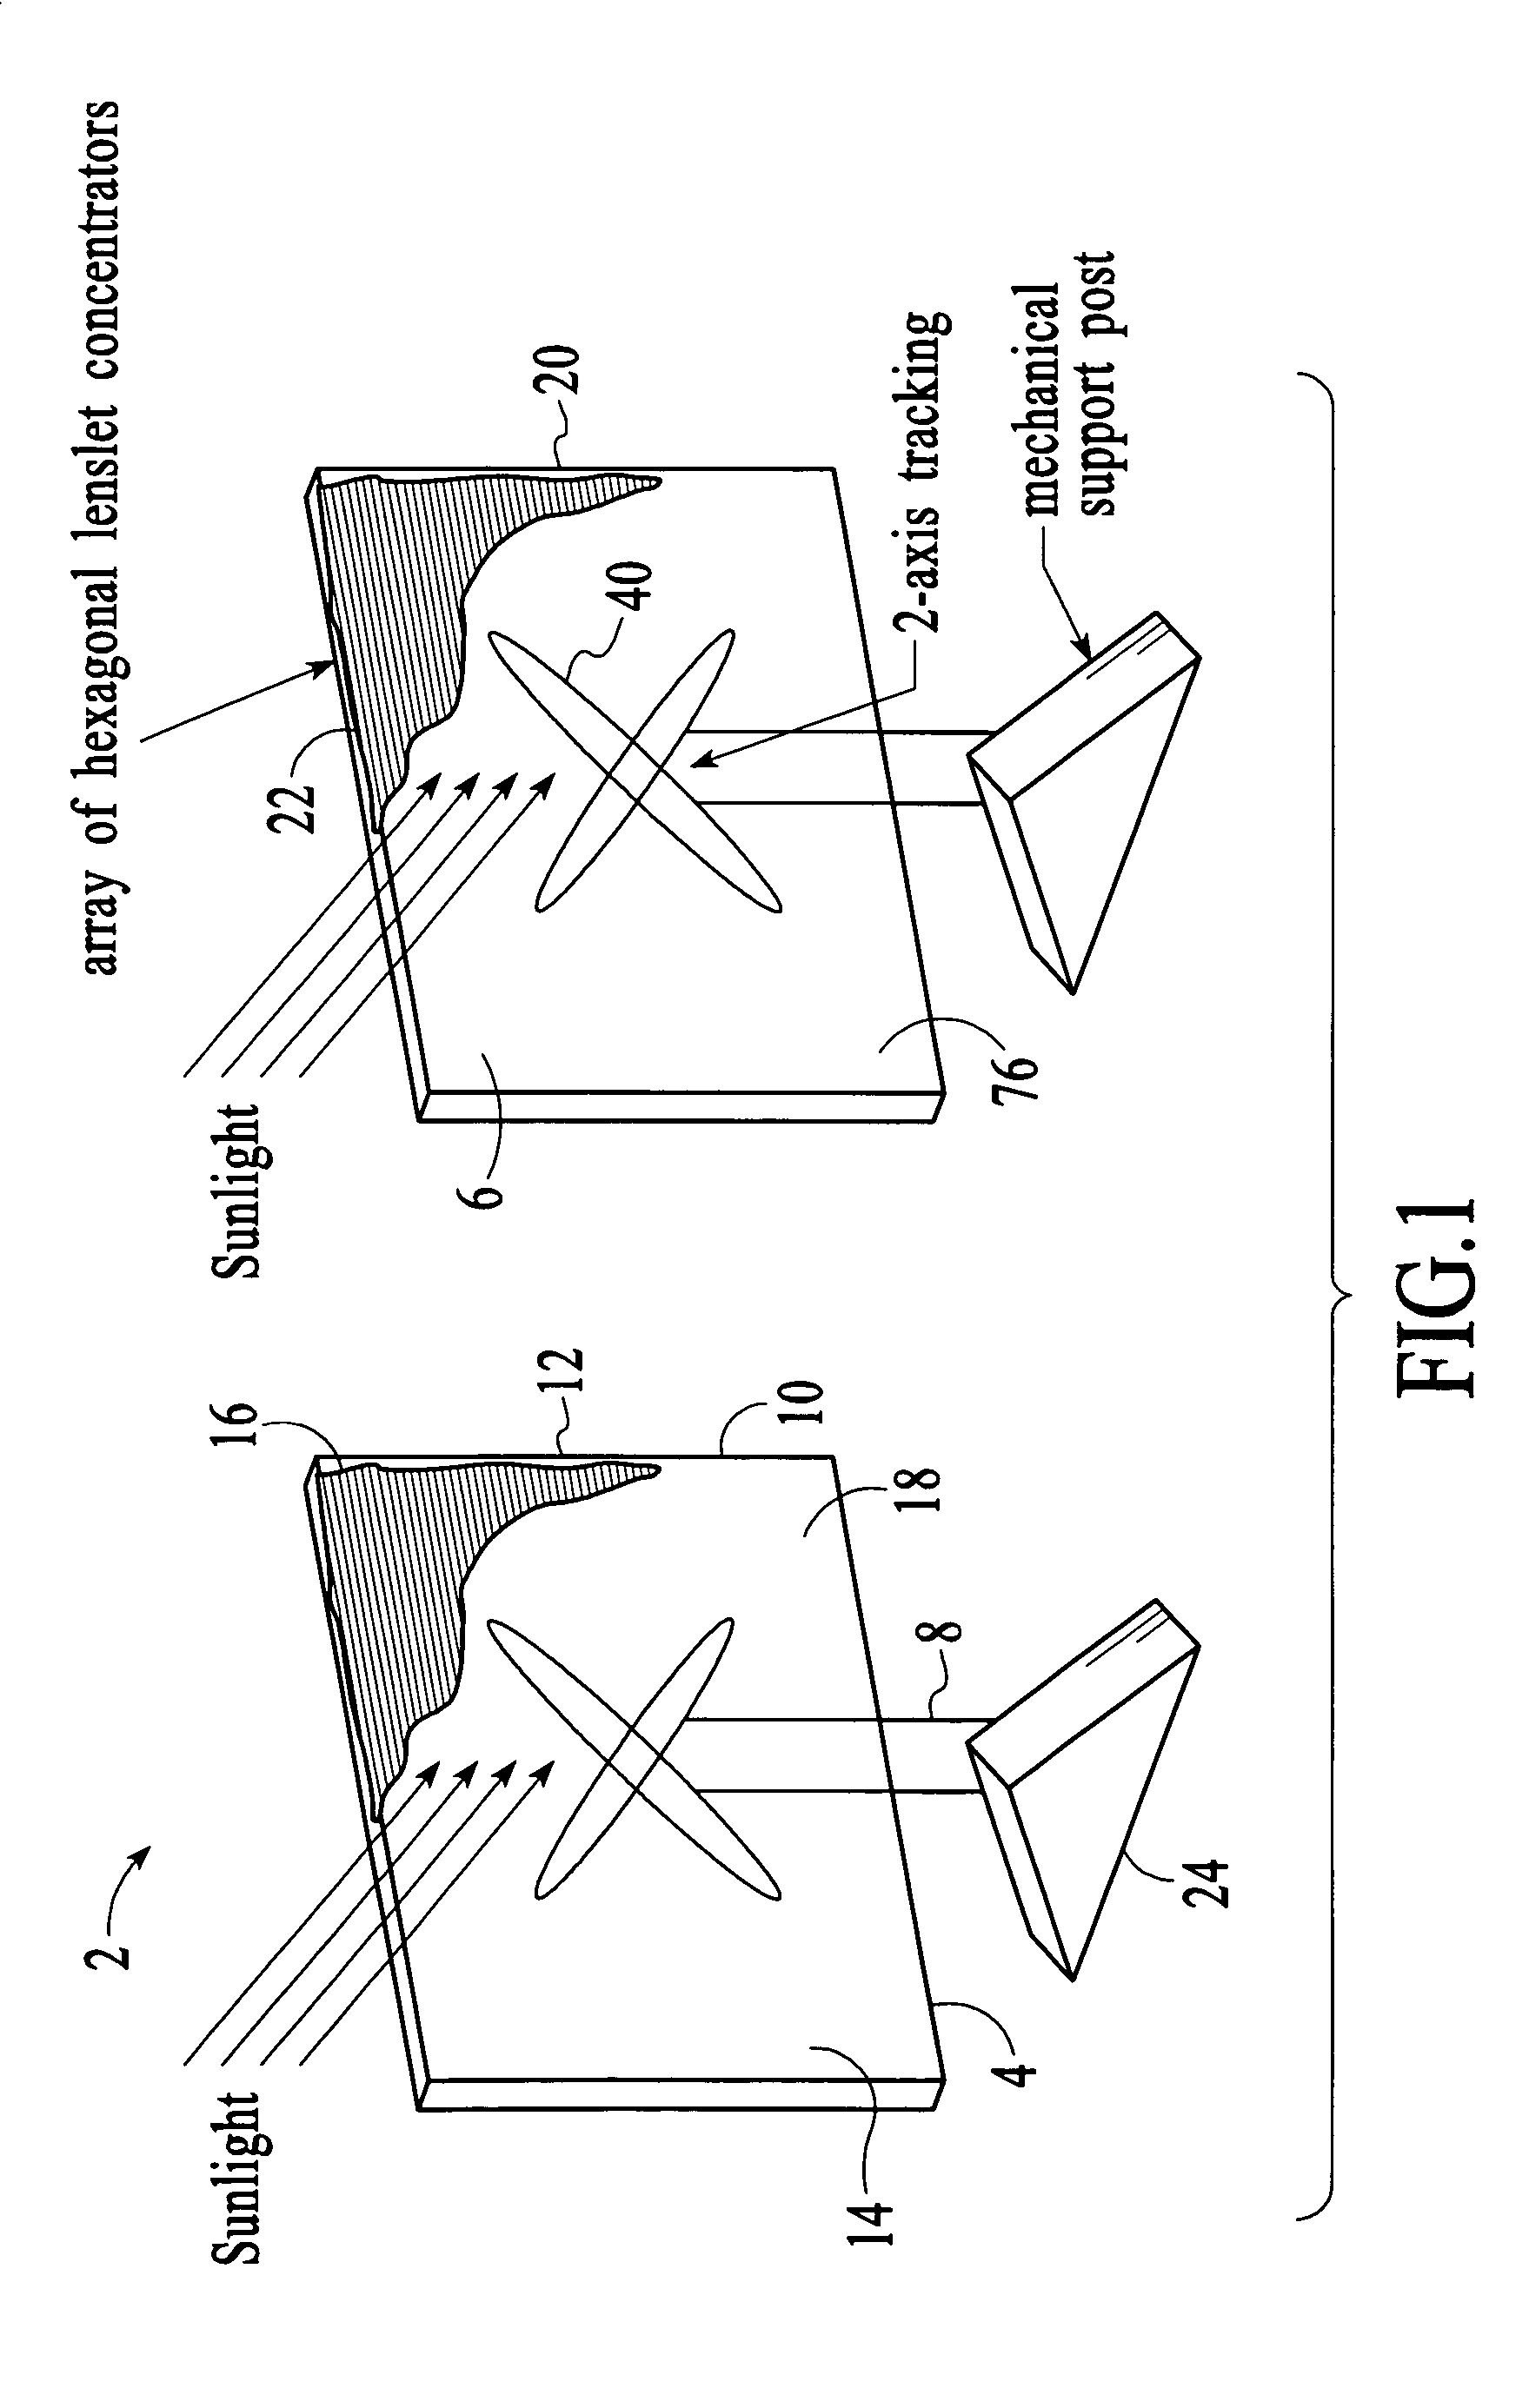 Method and apparatus for generation of electrical power from solar energy